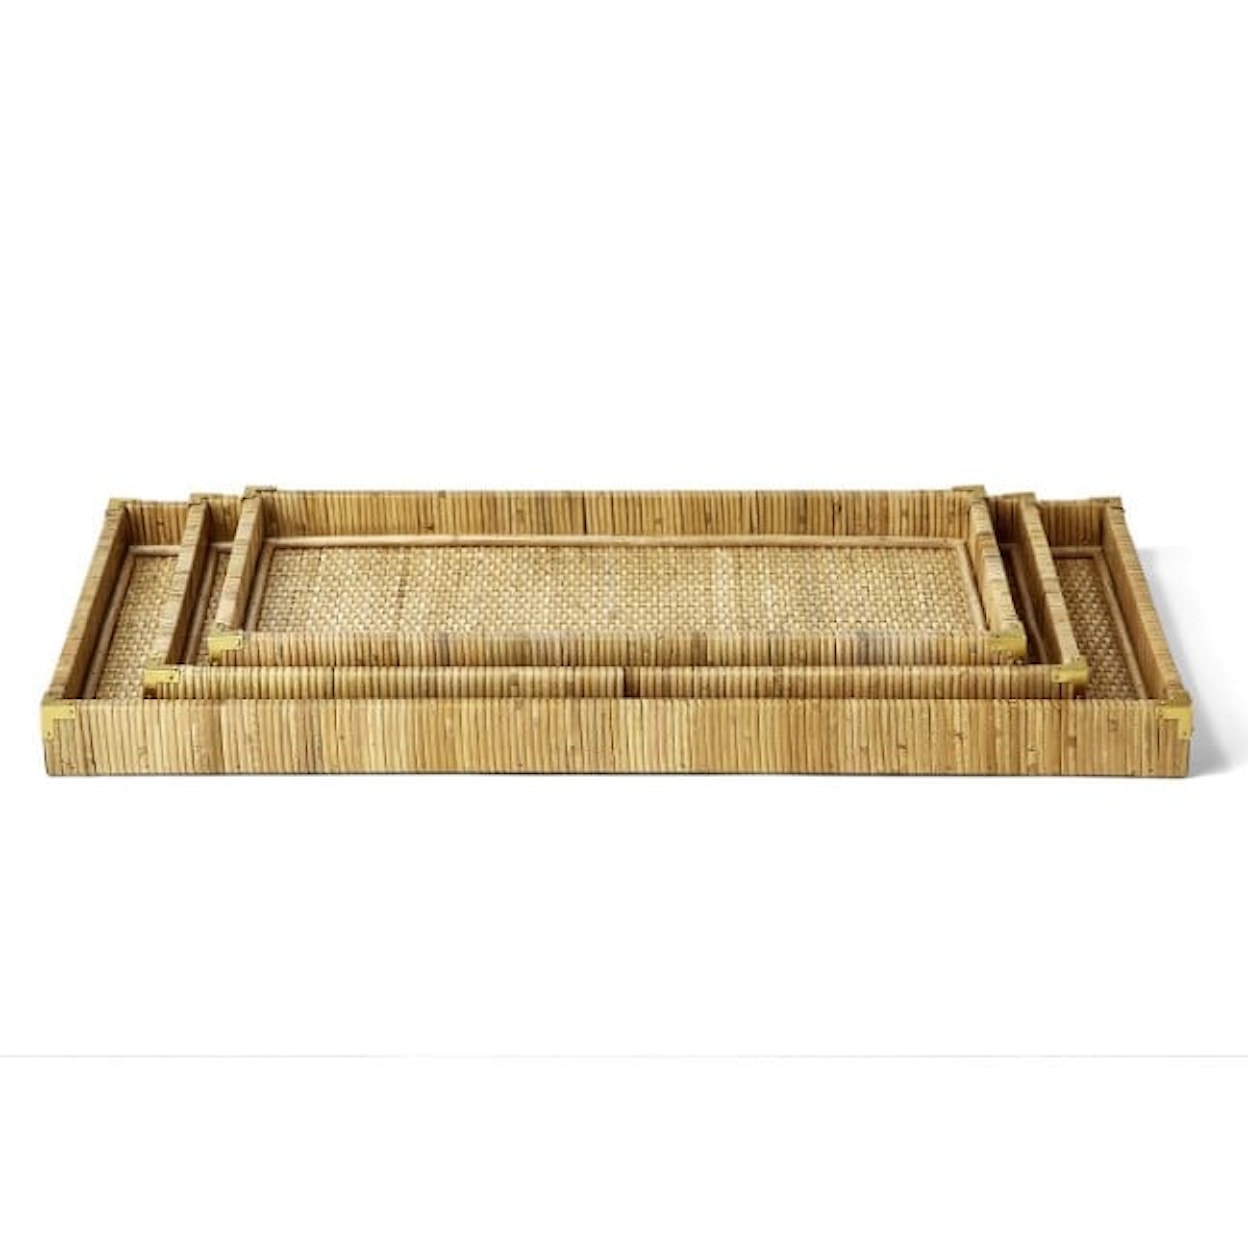 Two's Company Naturalist DREAM WEAVERS LARGE RATTAN TRAY